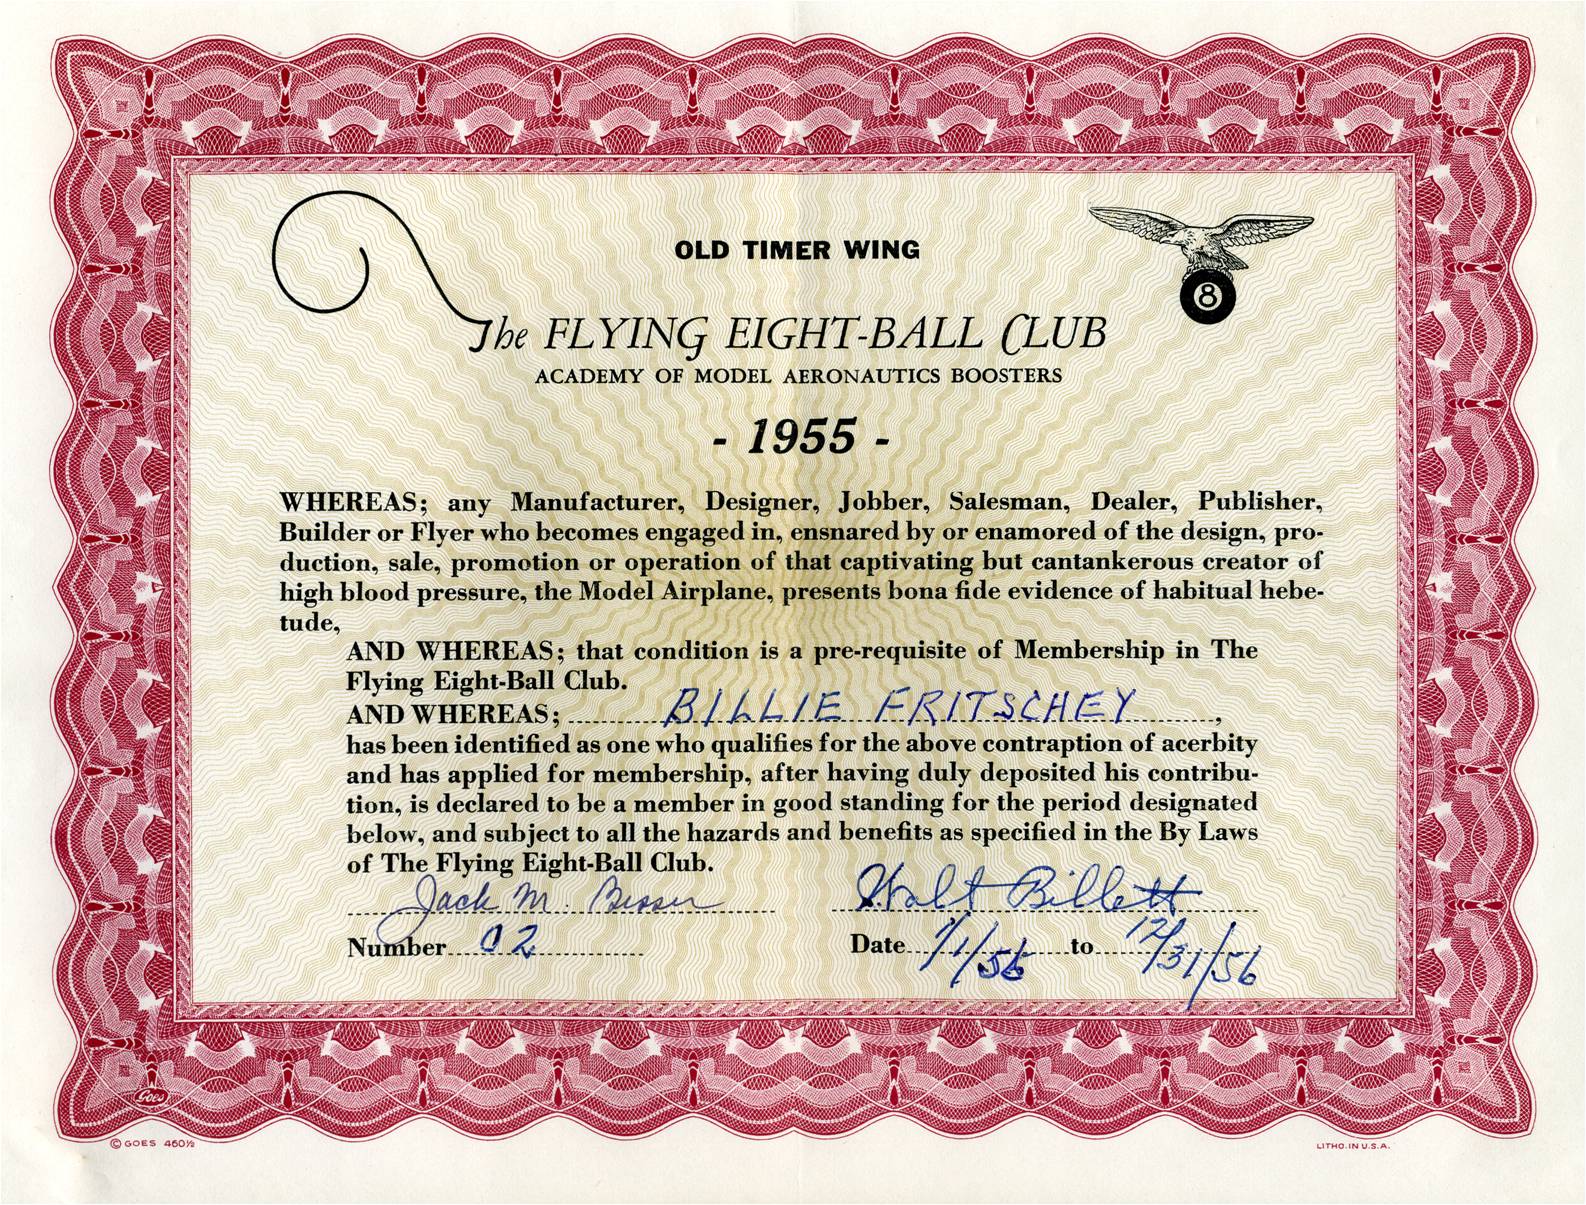 Flying Eight-Ball Club Old Timer Wing certificate, 1955. (Source: National Model Aviation Museum Archives, AMA Collection #0001.)